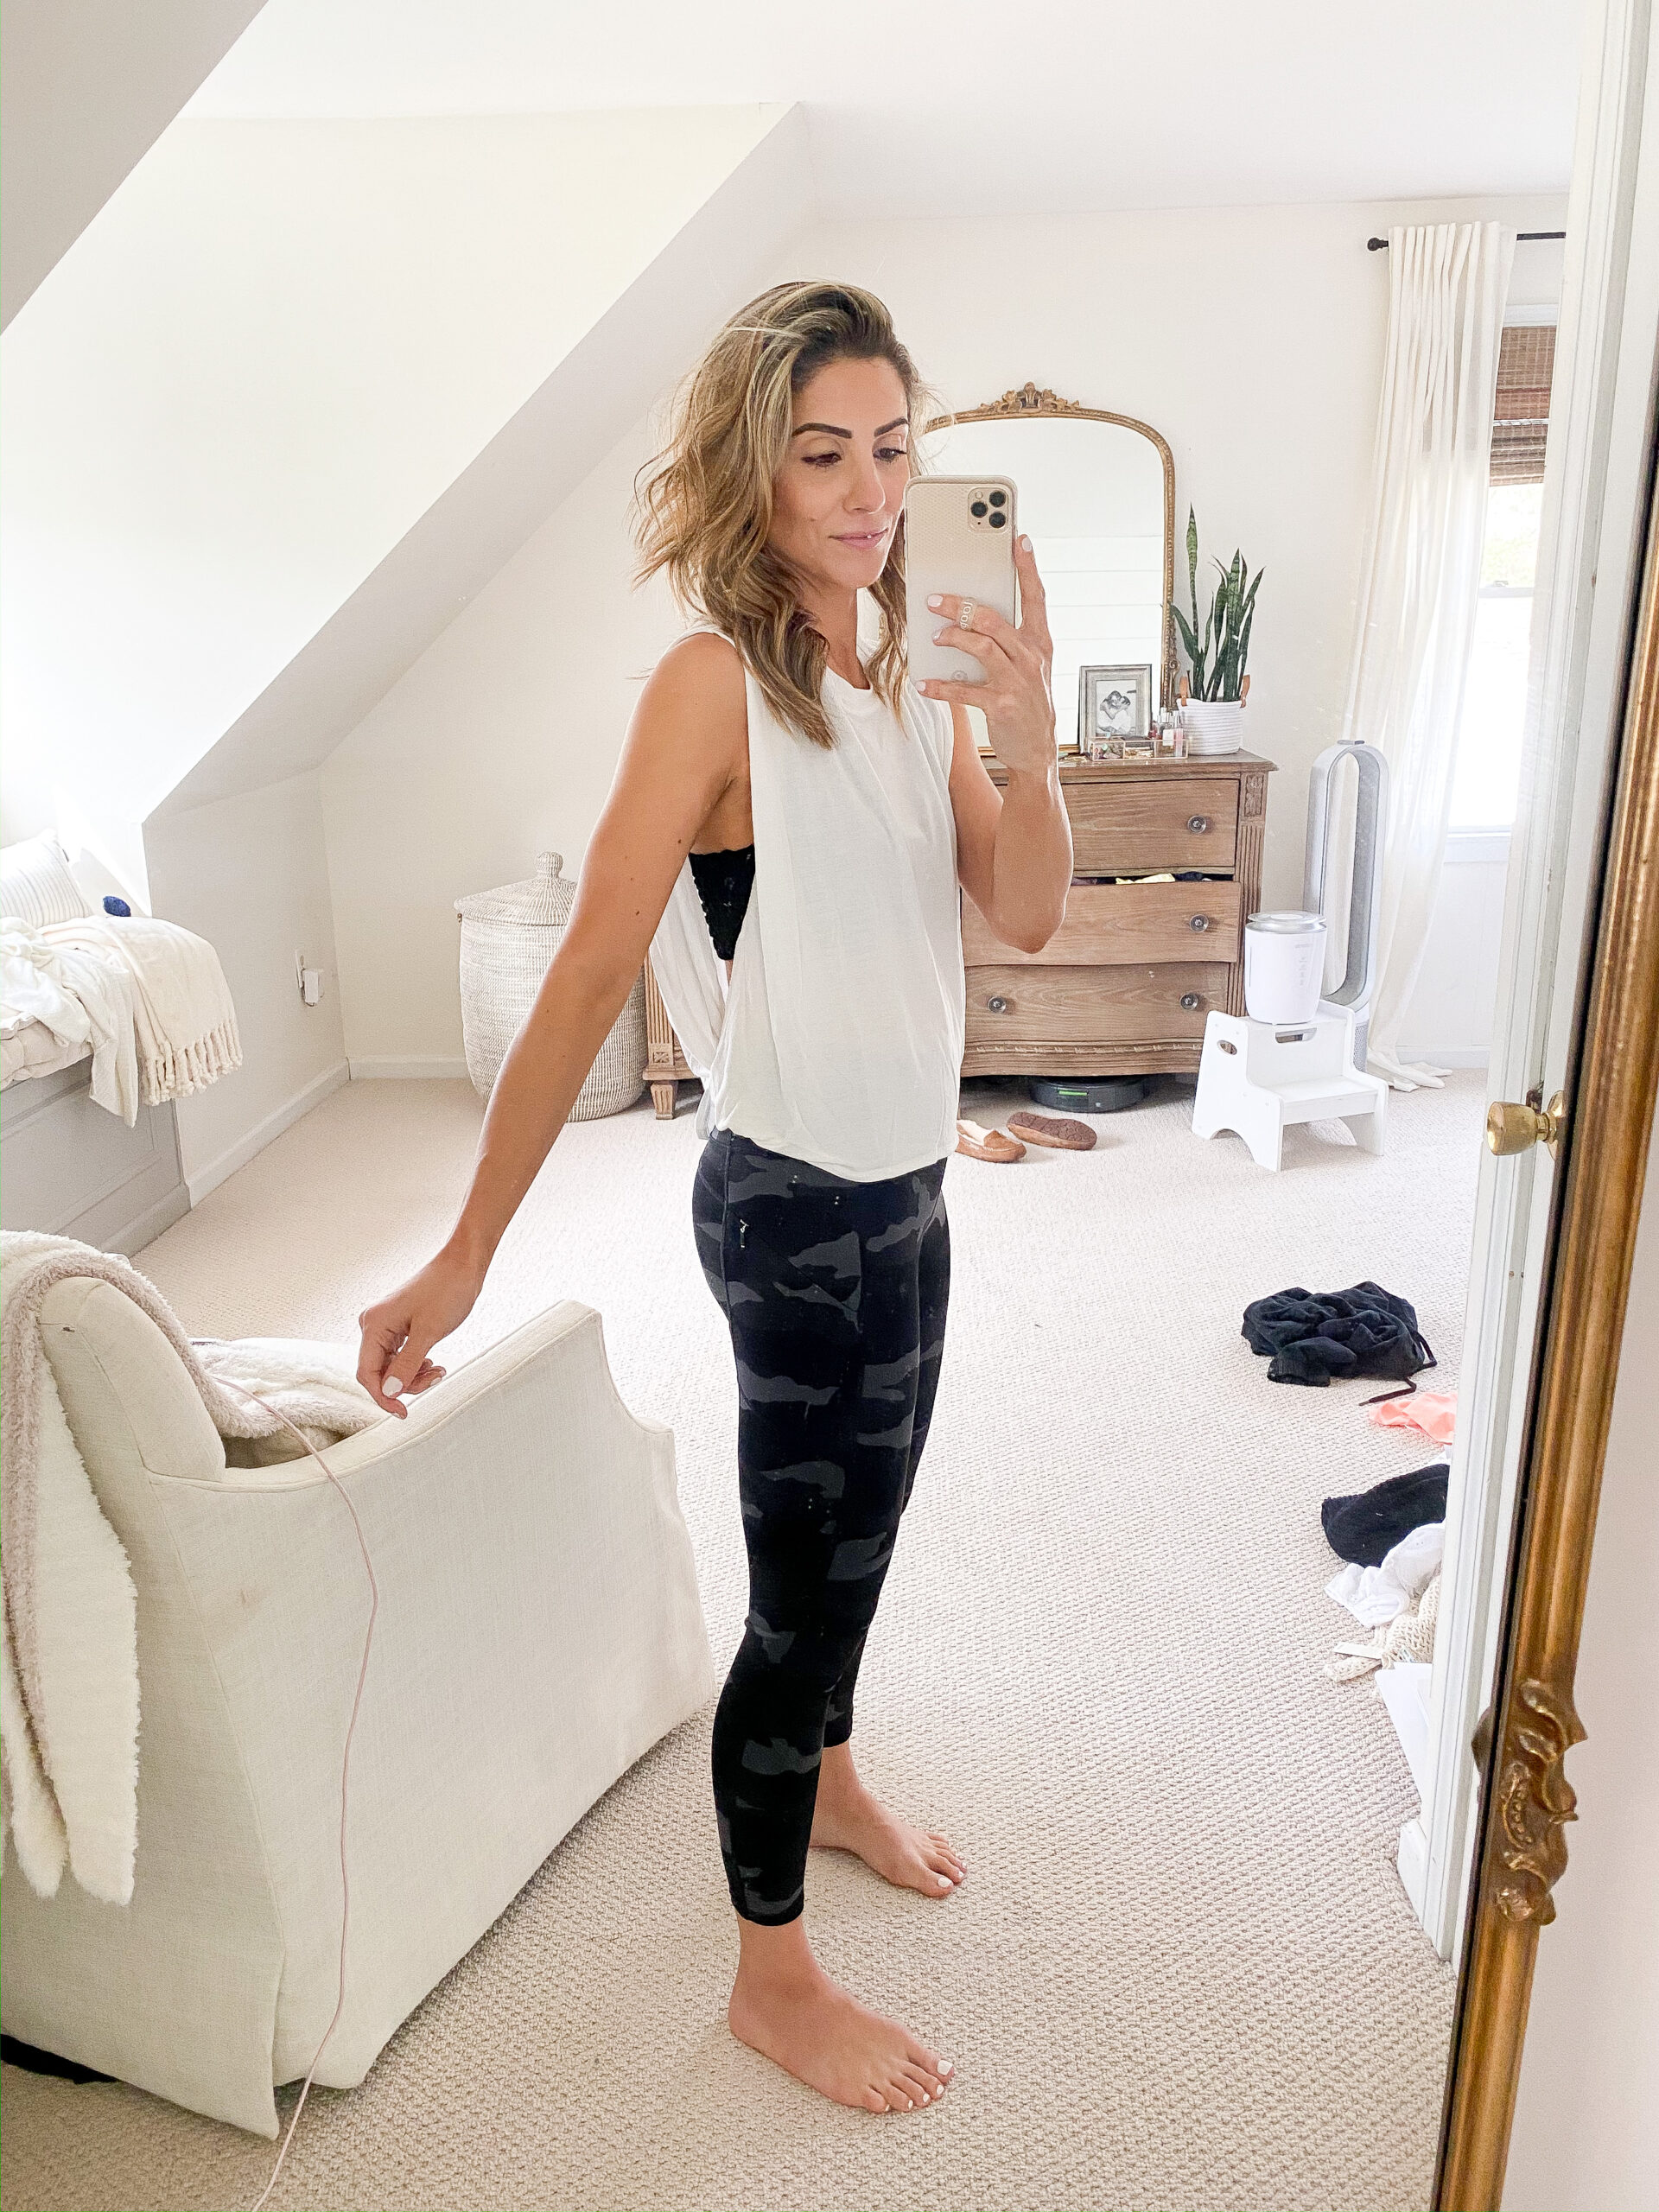 Connecticut life and style blogger Lauren McBride shares a round up of athletic wear, featuring Athleta, Free People, and Fabletics.